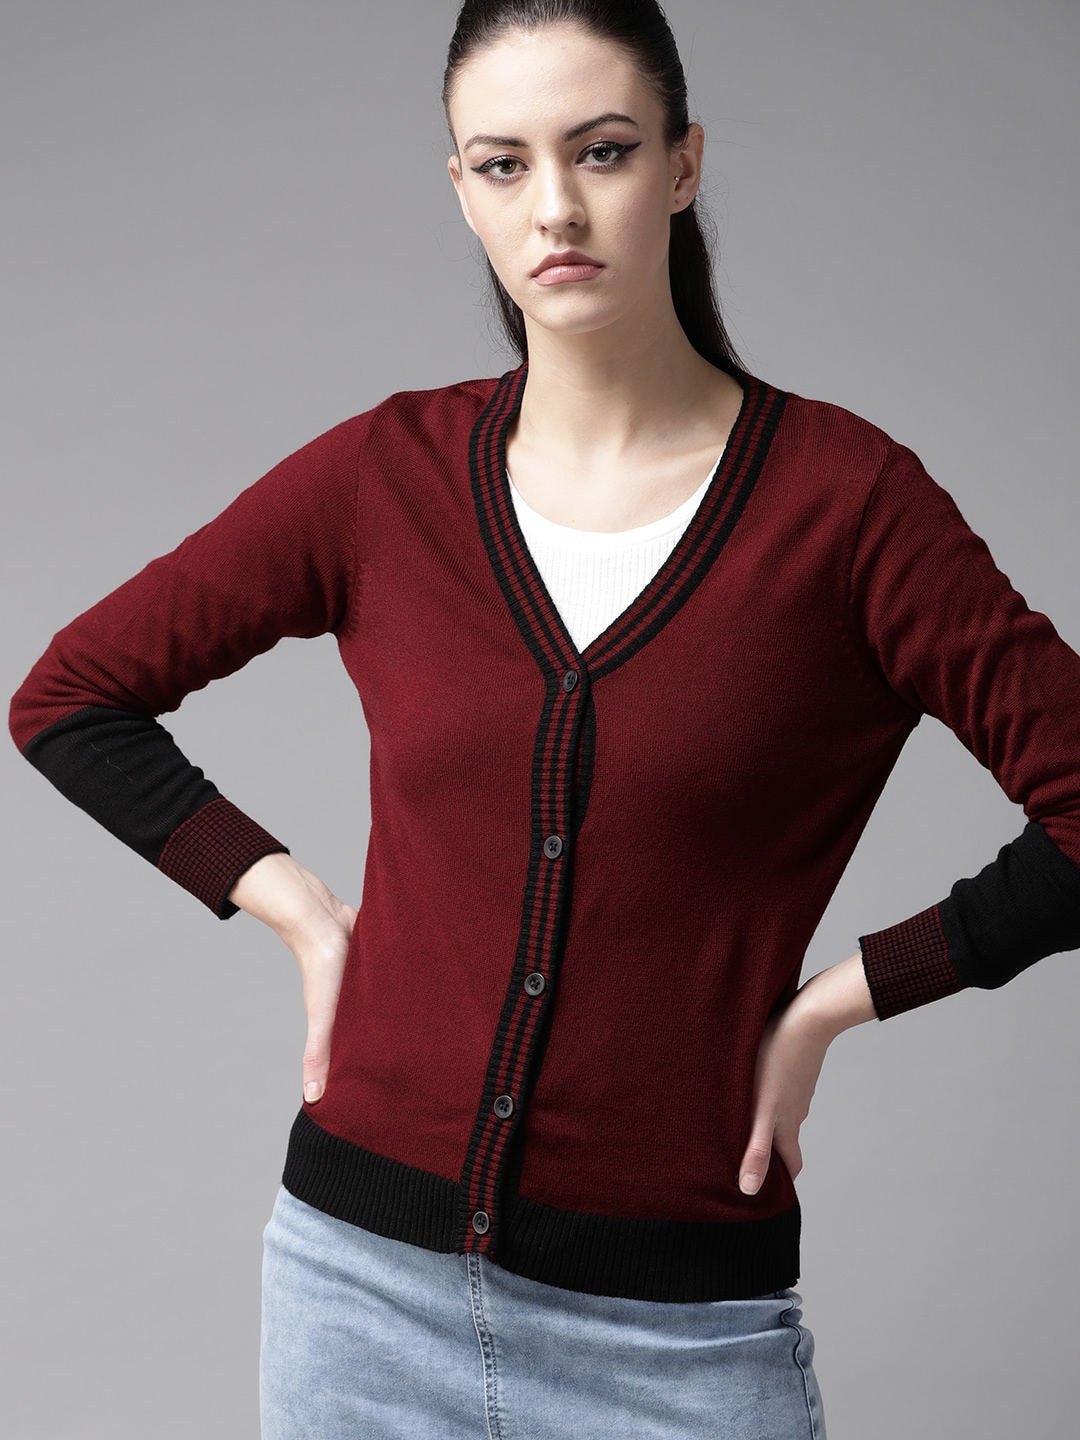 The Roadster Lifestyle Co Women Maroon Solid Cardigan Price in India